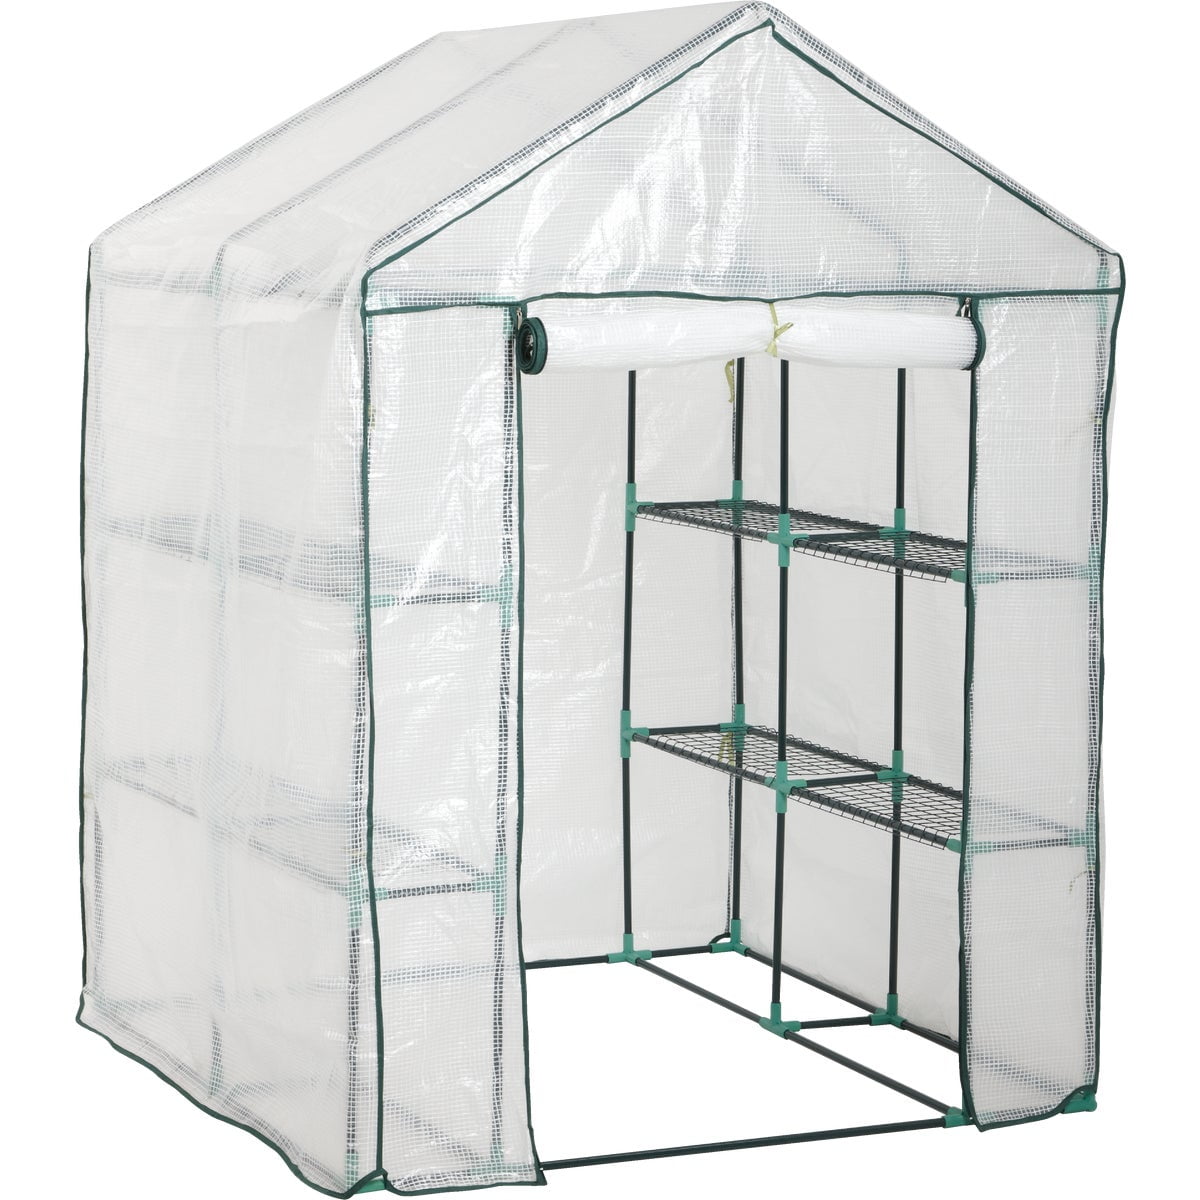 4HOMART Outdoor Green House 13x7x7 Walk-in Greenhouse with PE Cover,Strong Metal Frame,8 Windows and 1 Door with Roll-Up Zipper Door Plant Garden Green House